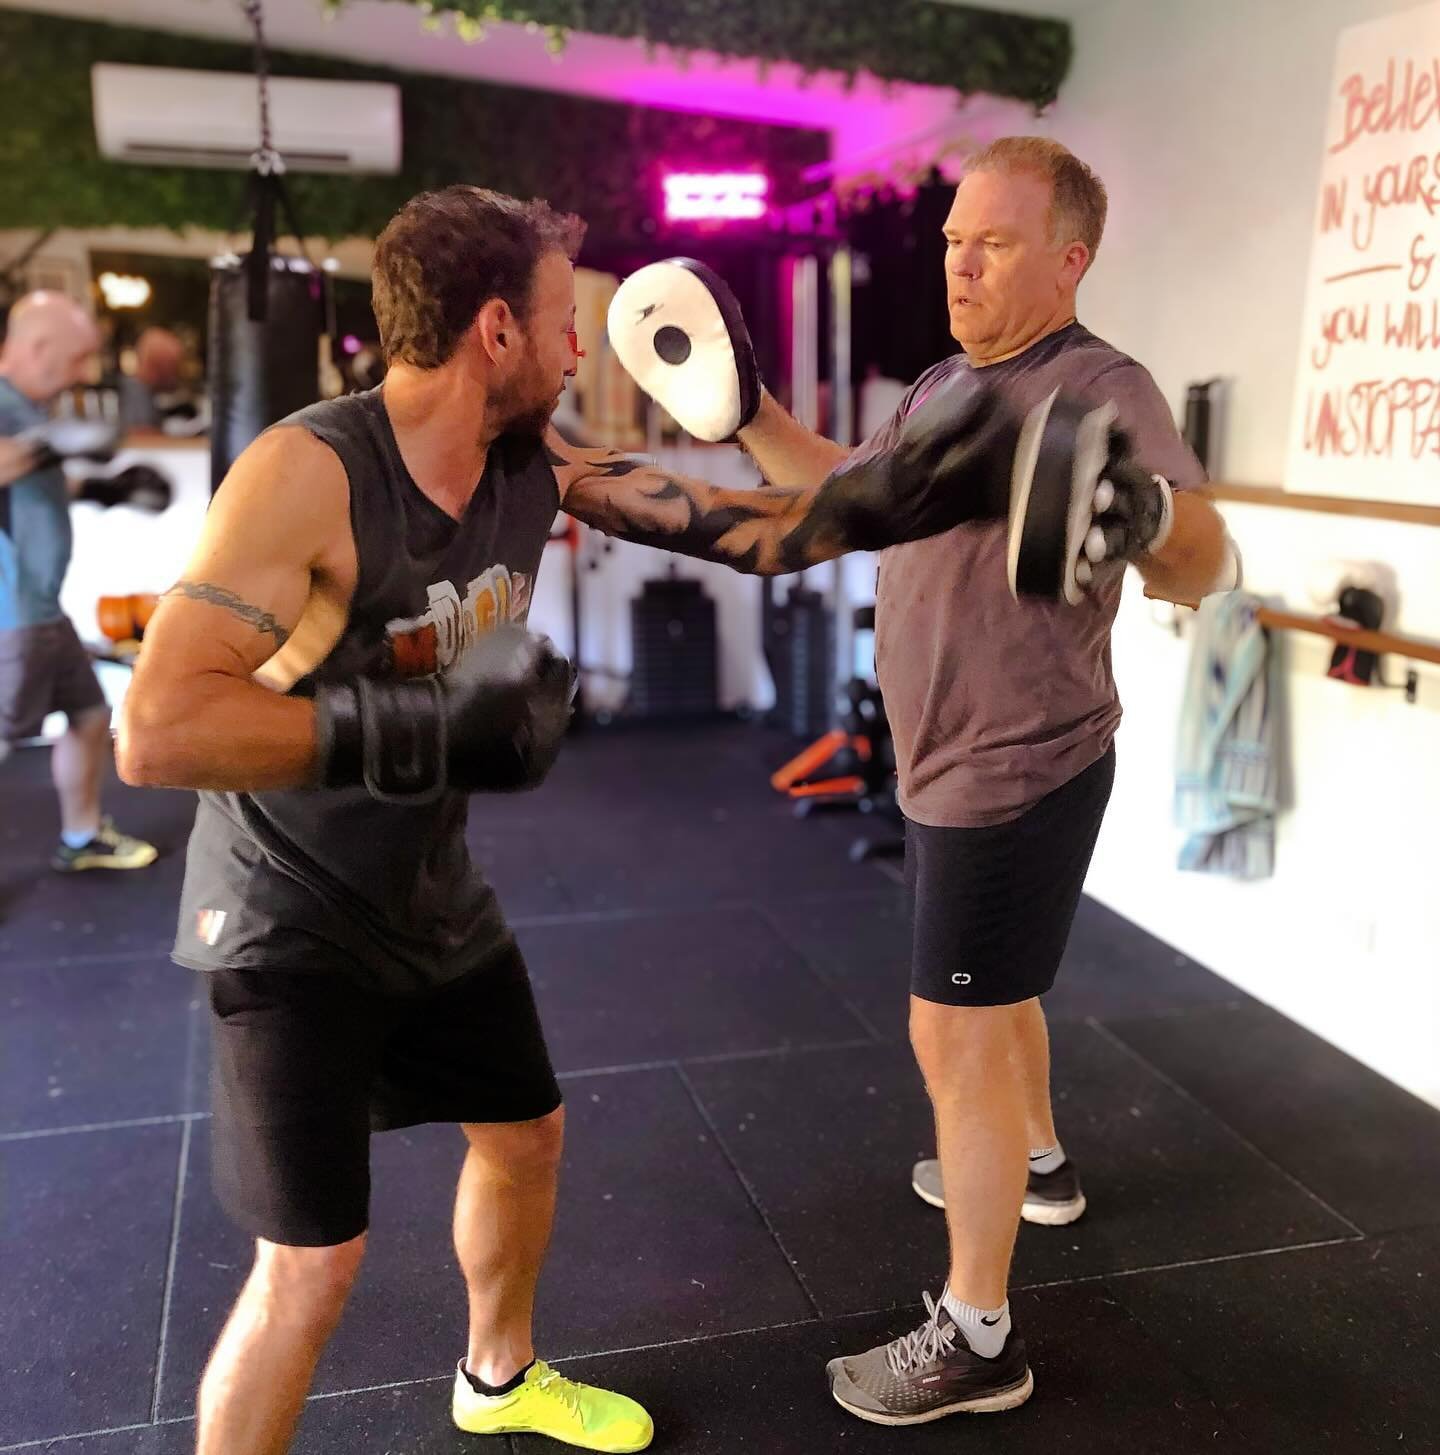 Do Saturdays get any better than this 🥊🥊

Started the weekend with an awesome boxing session, smashing out a workout and have a great time while doing it

- Muscle and Mates Class (only mens group) only for $58